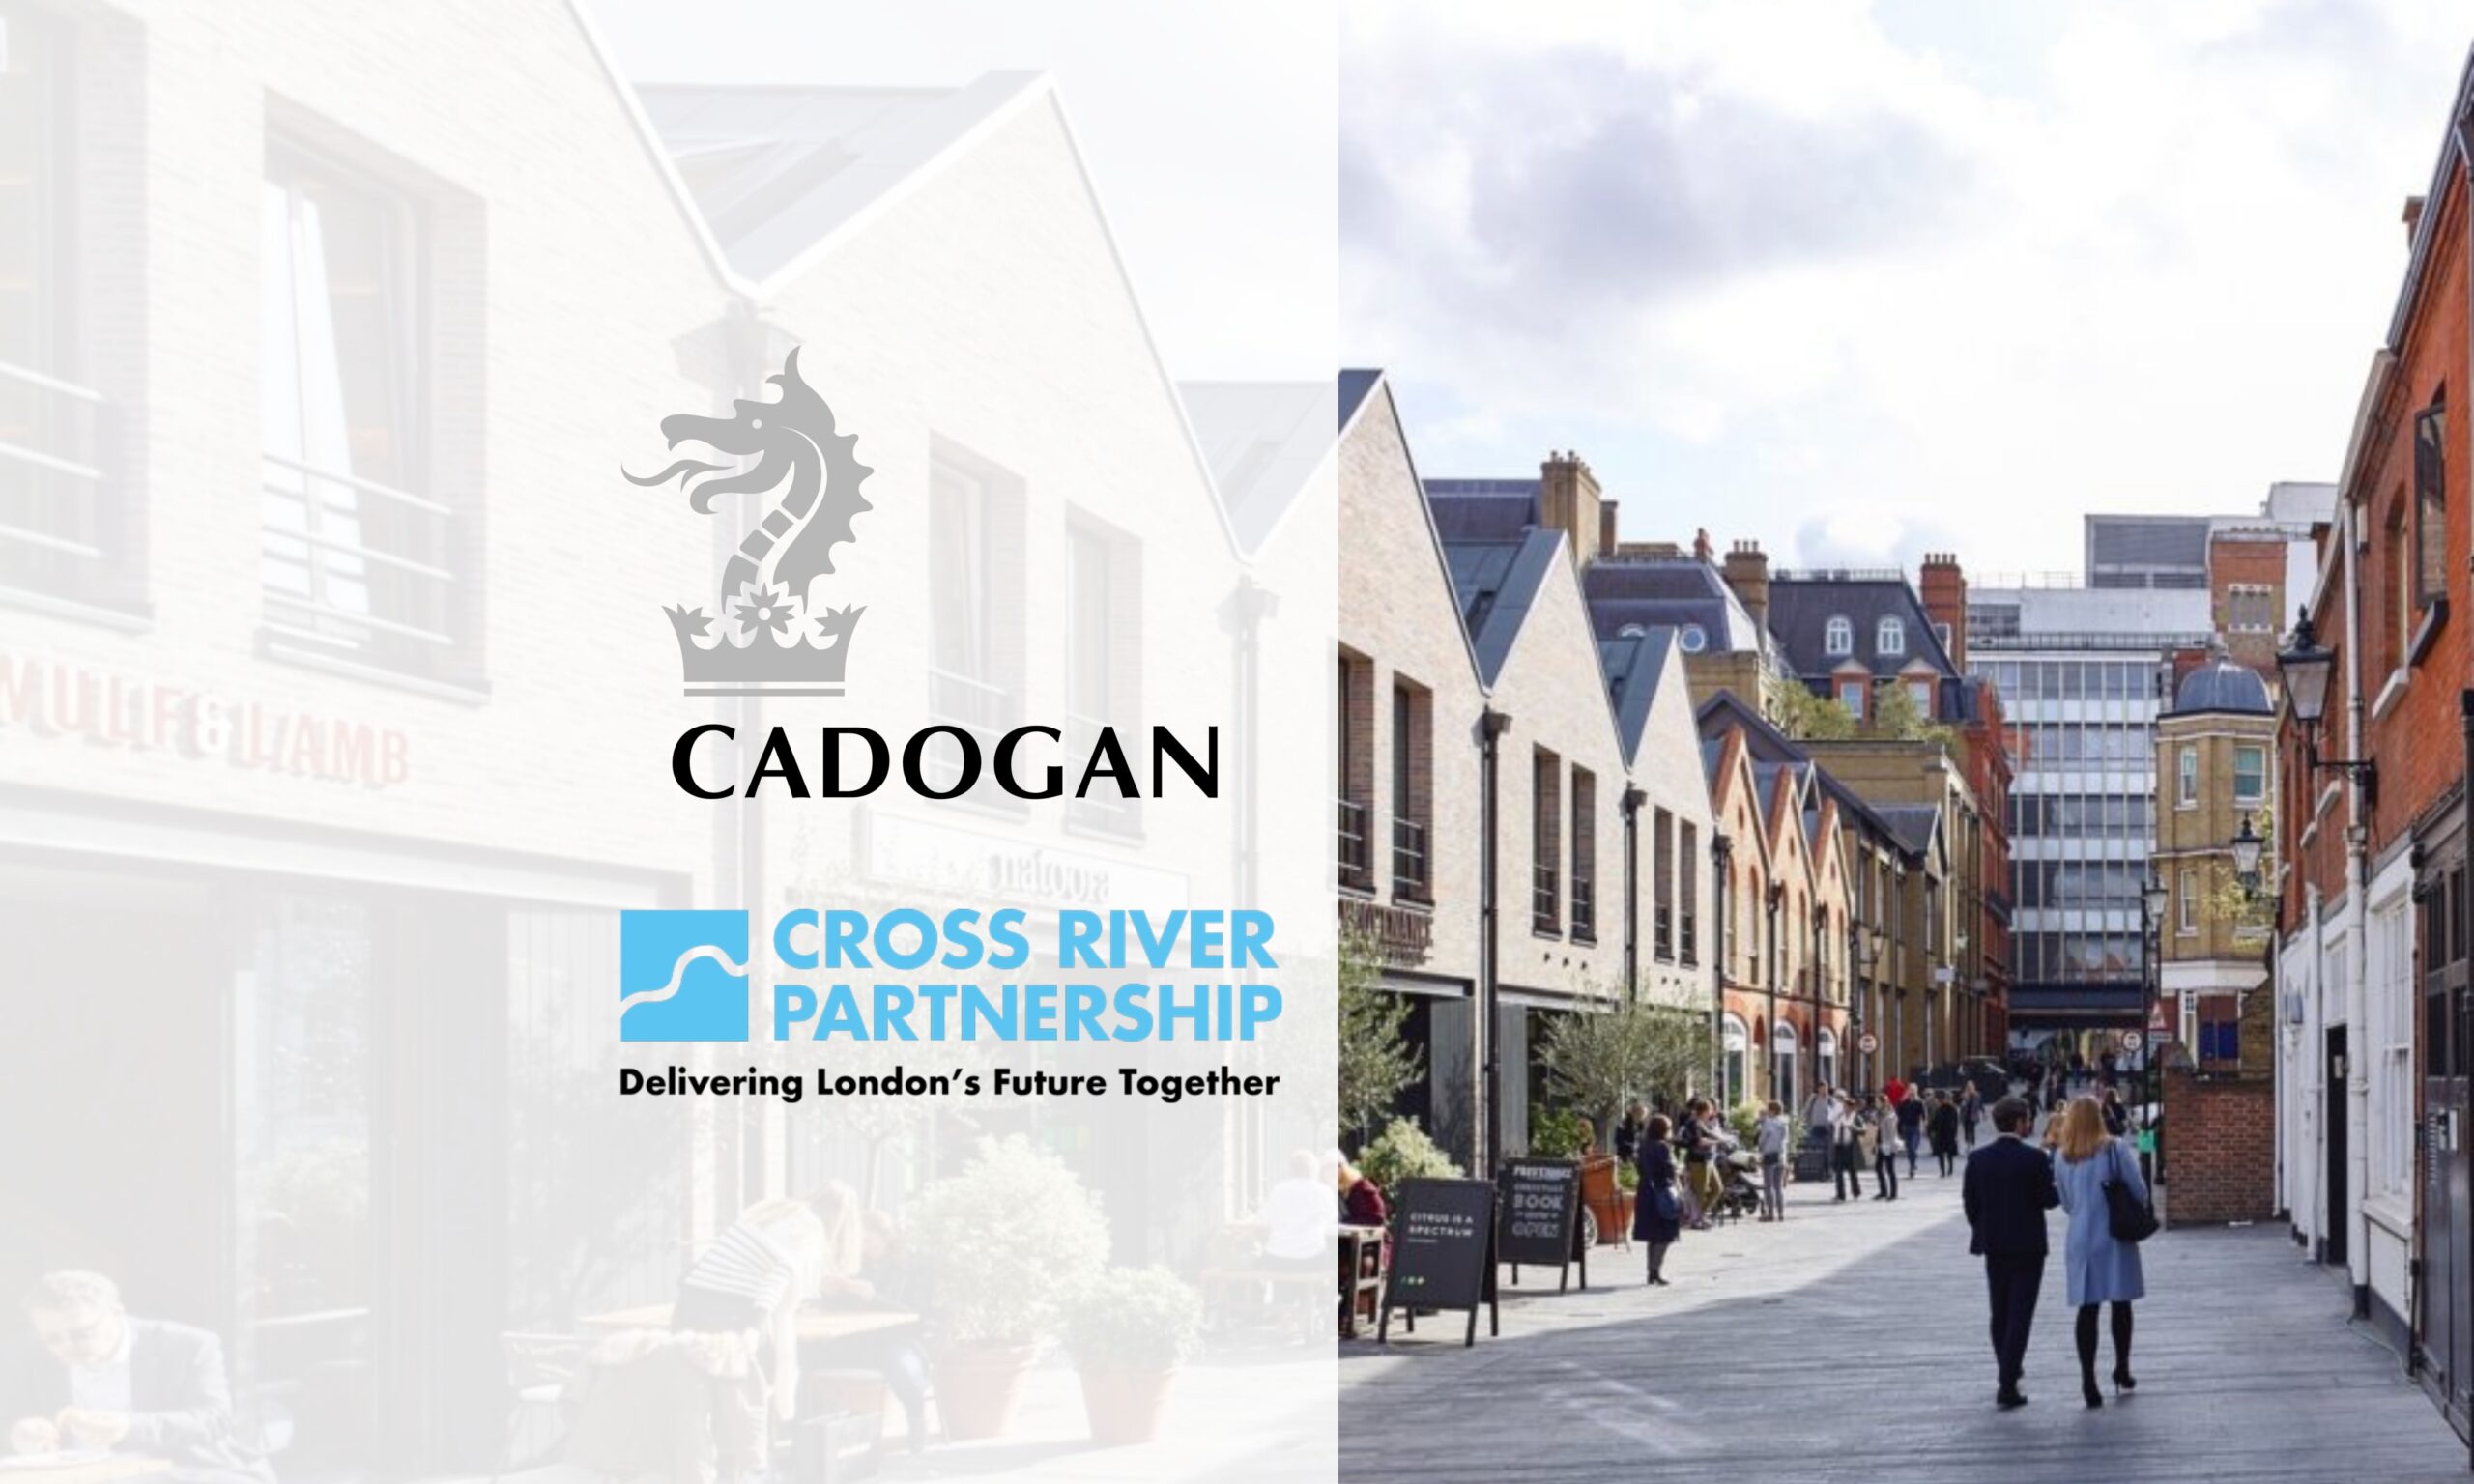 EMSOL completes project with Cross River Partnership and Cadogan Estates to monitor delivery-related noise pollution 